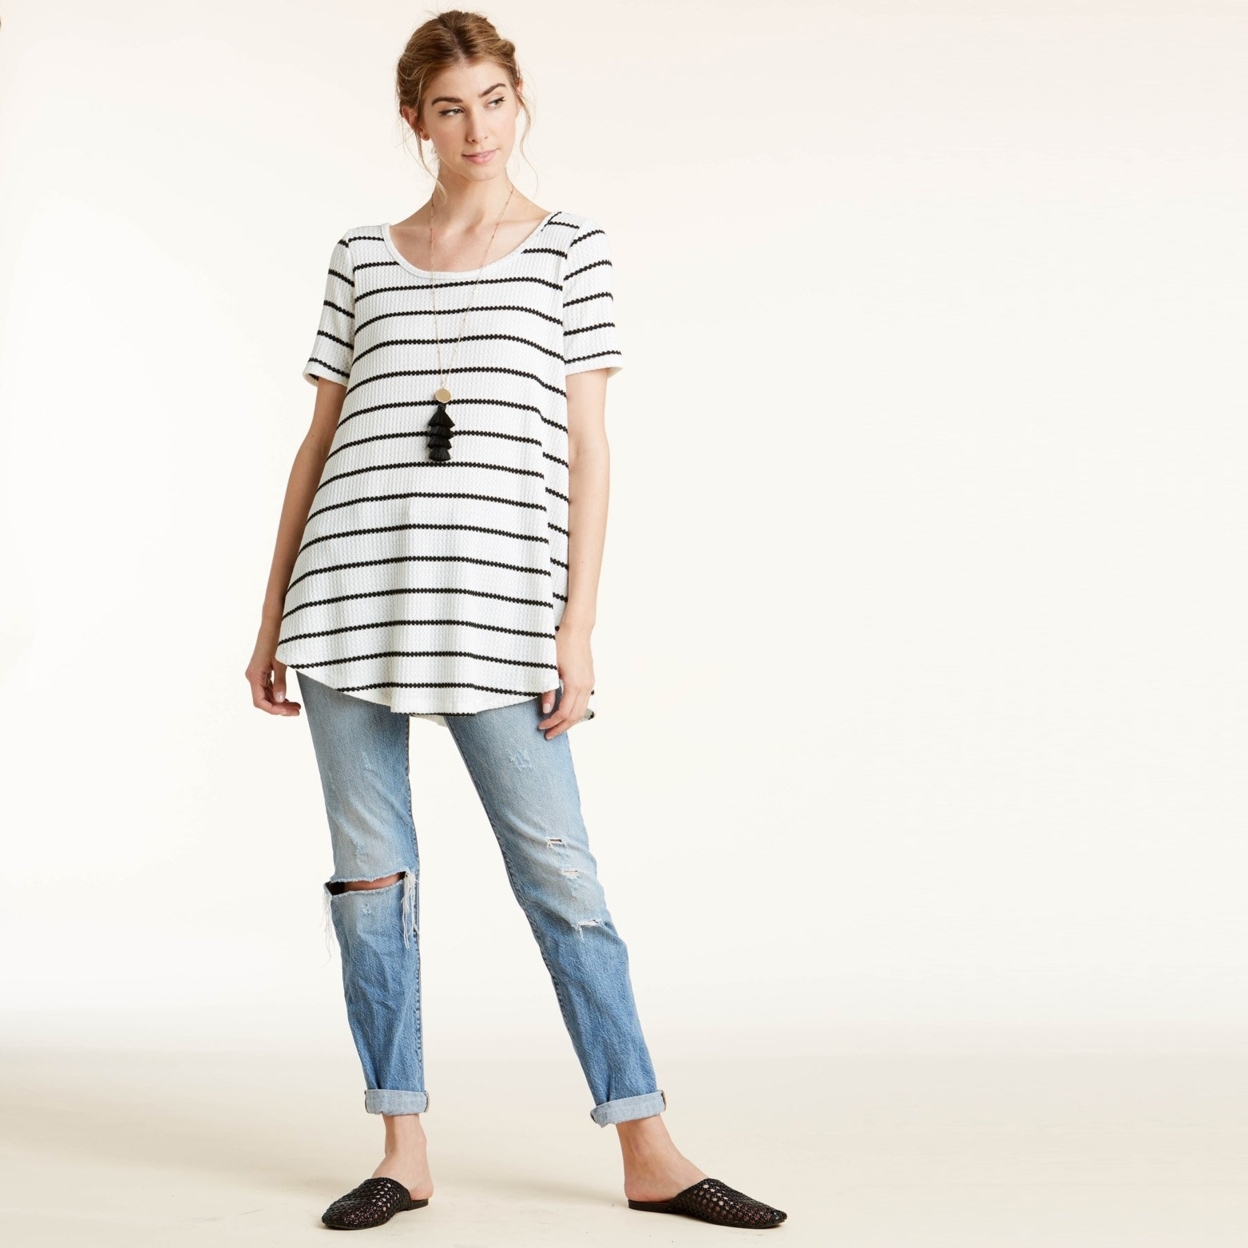 Totter Stripe Waffle Knit Top - White, Small (2-6)